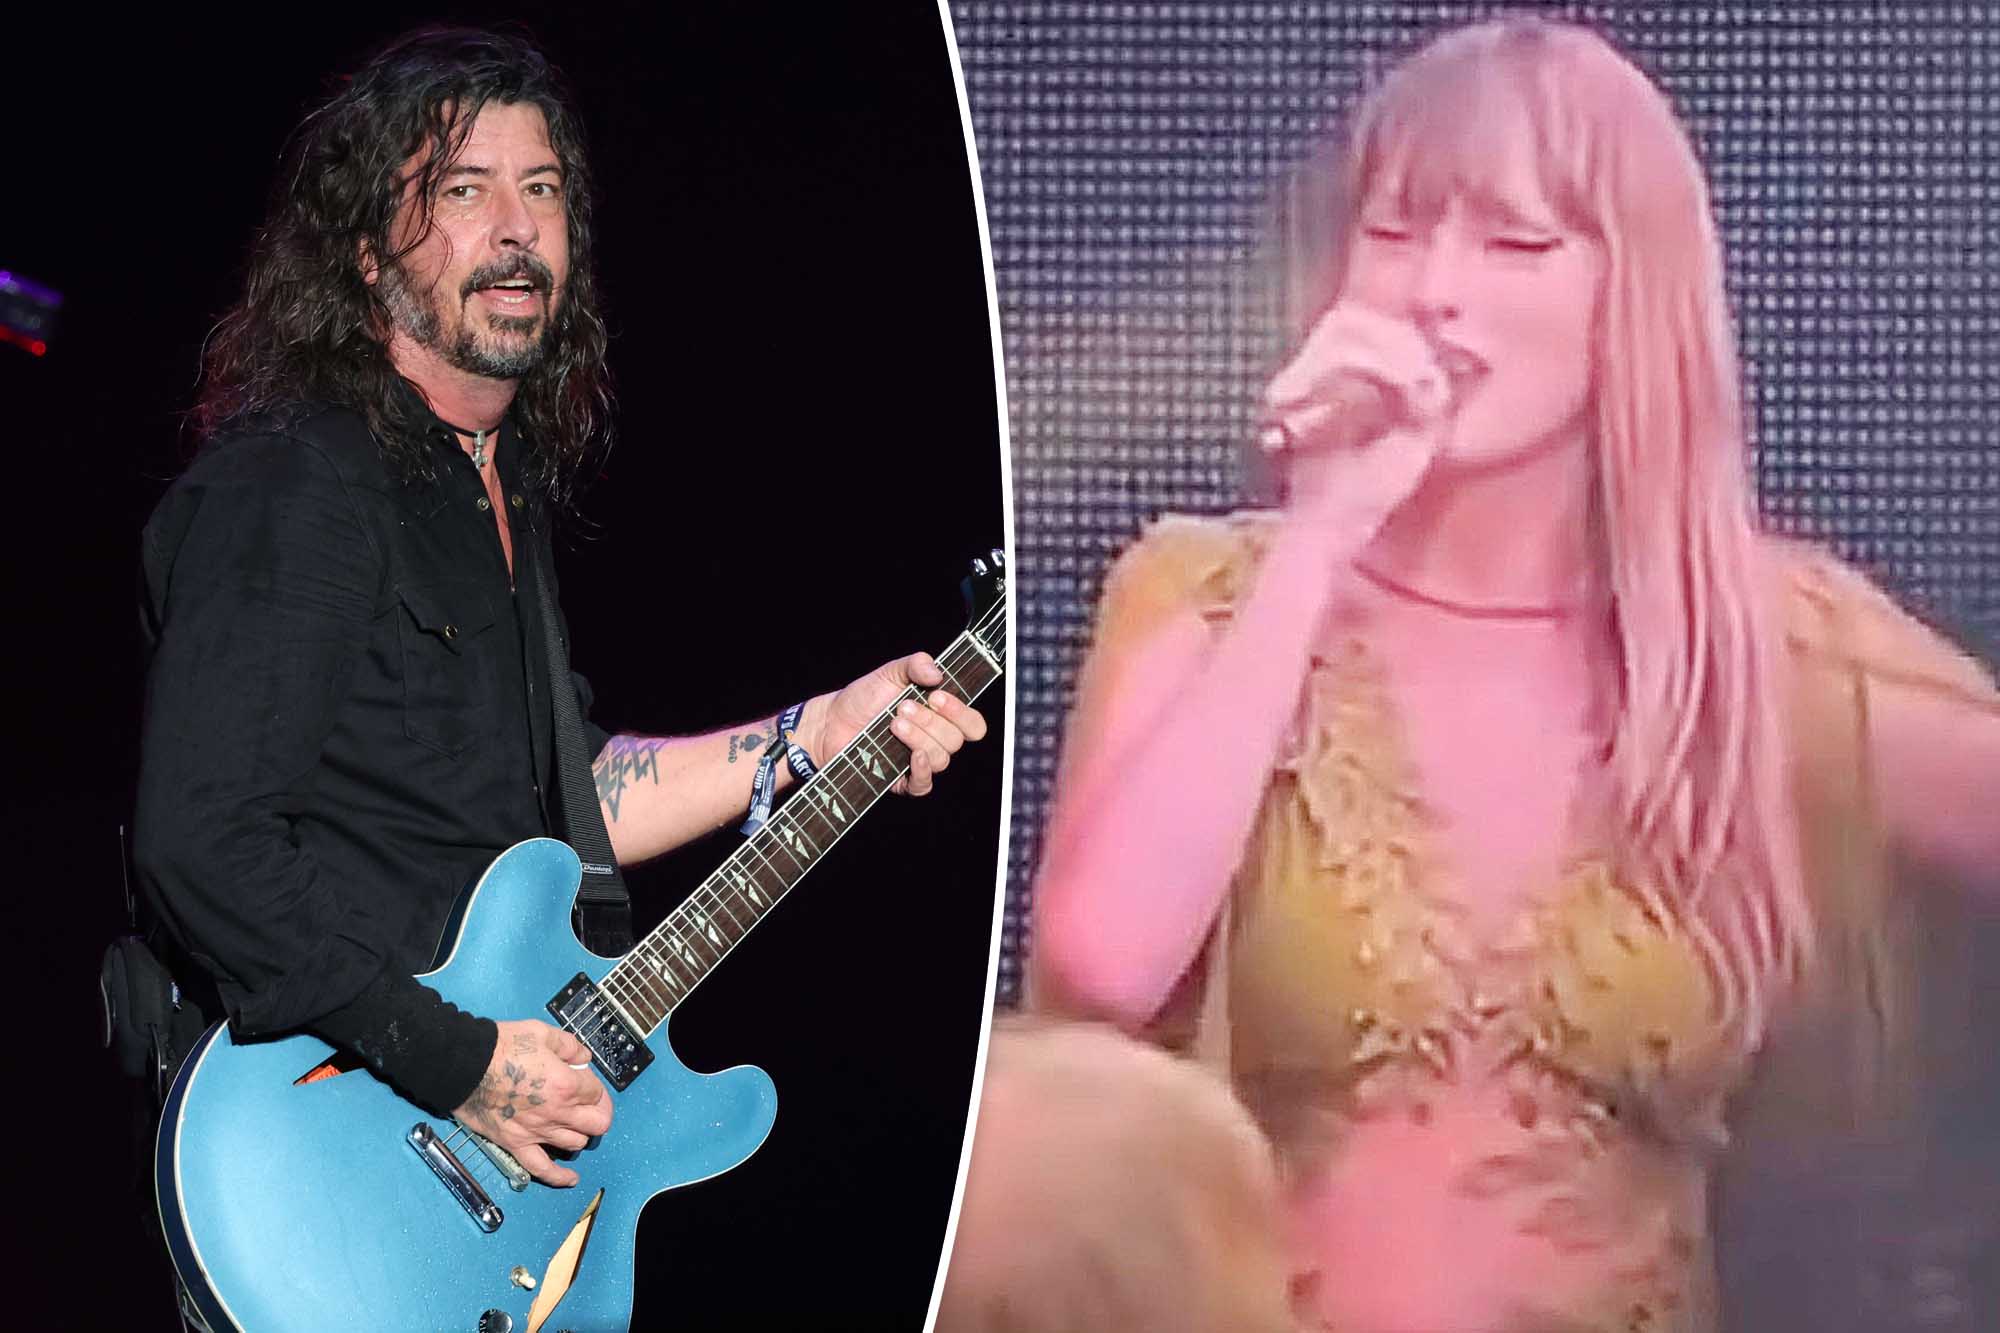 Taylor Swift Claps Back at Dave Grohl's Live Performance Comments in Epic Fashion!